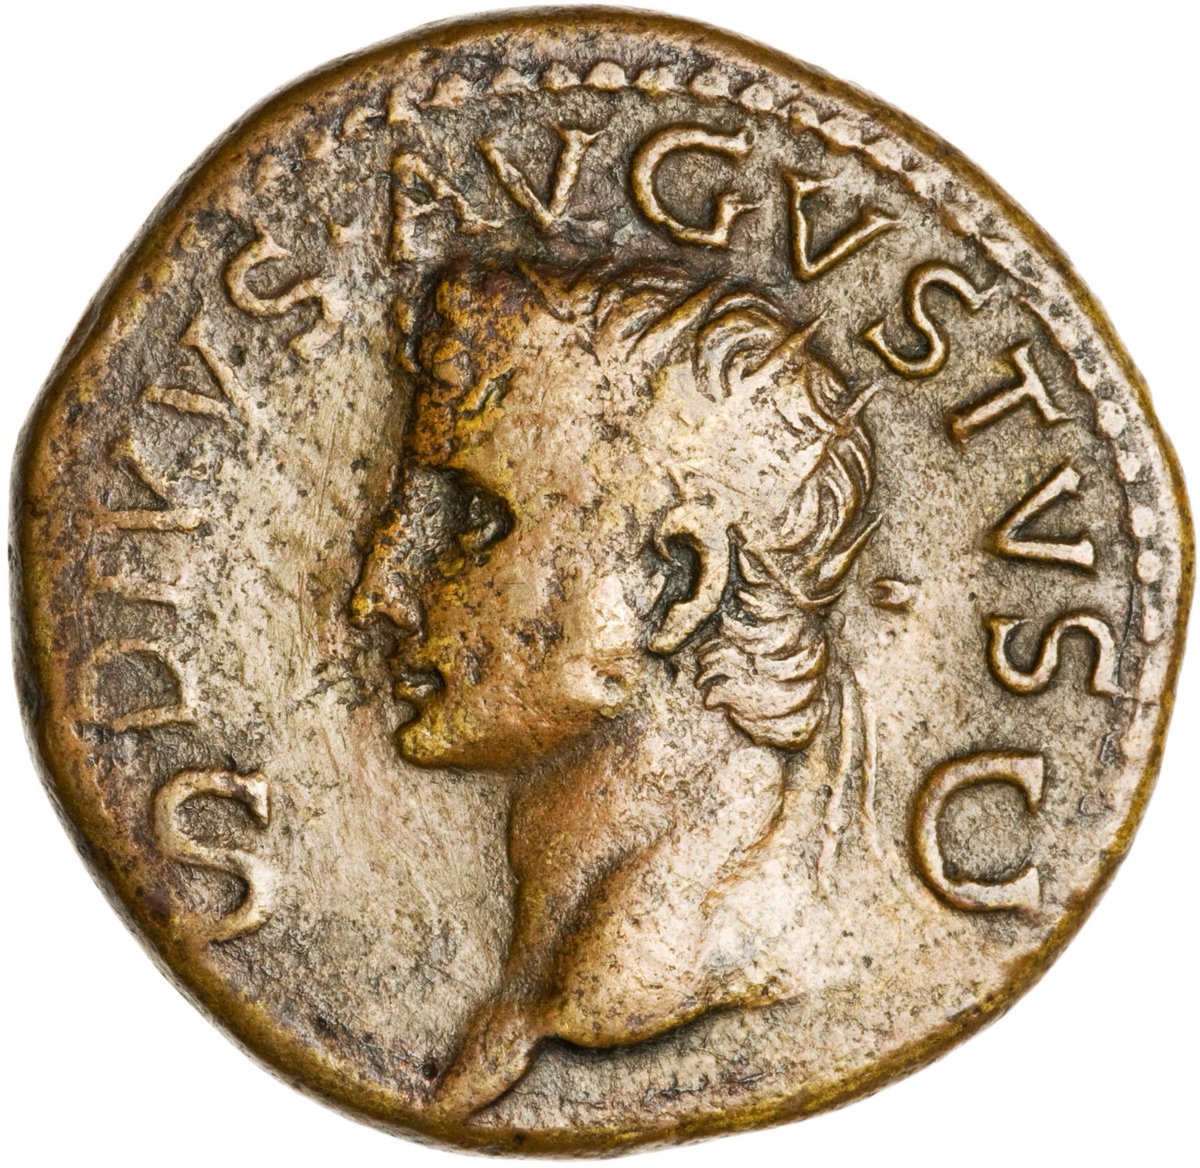 The Obverse of the coin shows a portrait of Augustus wearing a radiate crown, a mark of deification for the men of the imperial family, with the simple Legend DIVVS AVGVSTVS S C - 'The Deified Augustus, by decree of the Senate'.